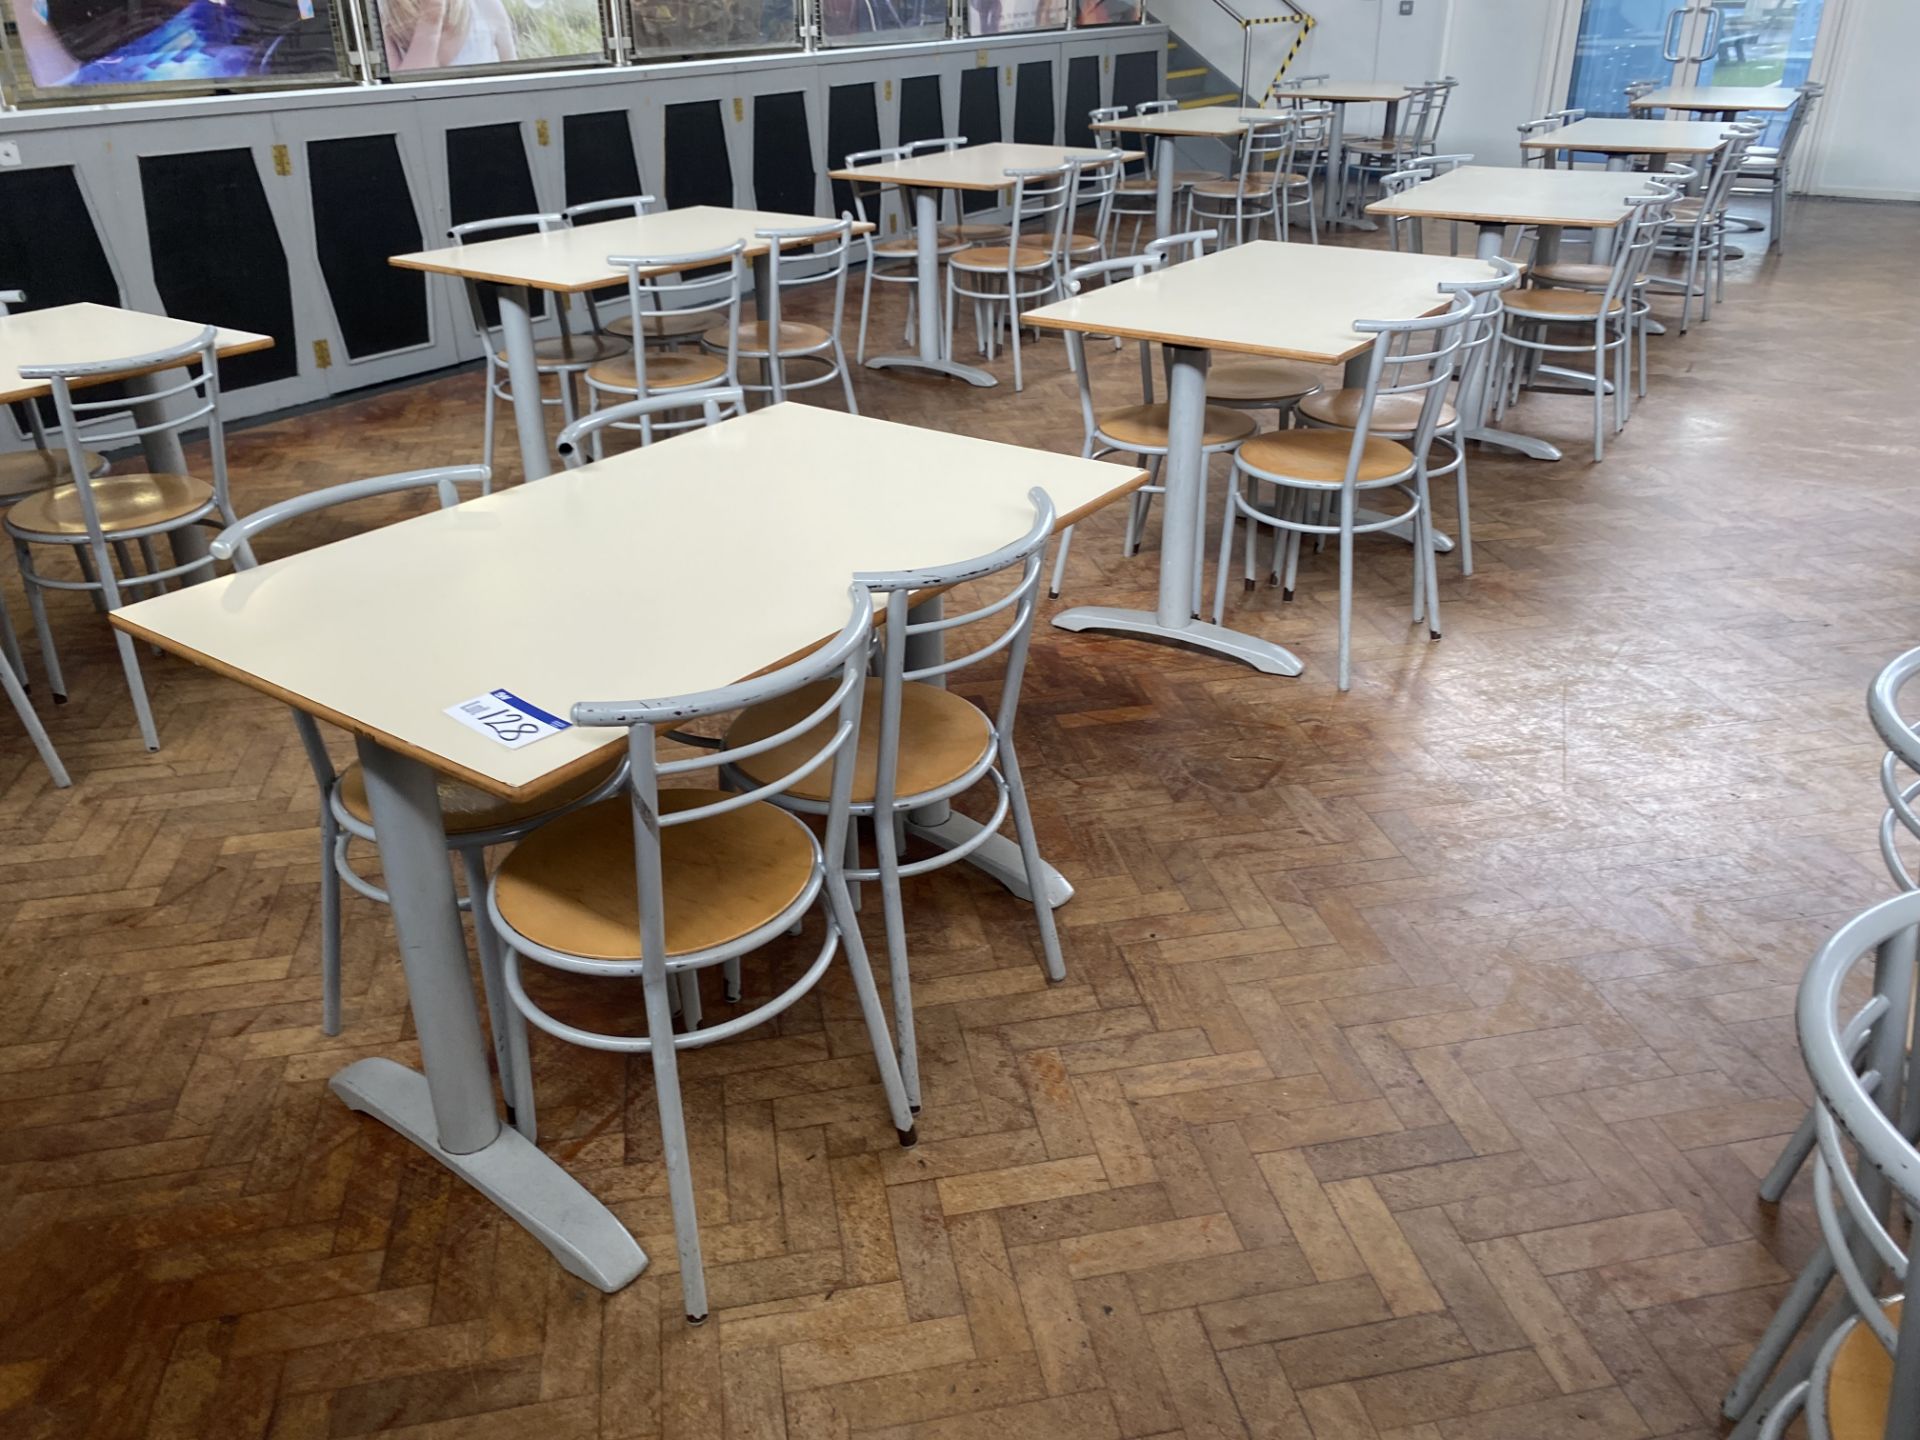 Five Tables, each 1.2m x 750mm, with 20 steel fram